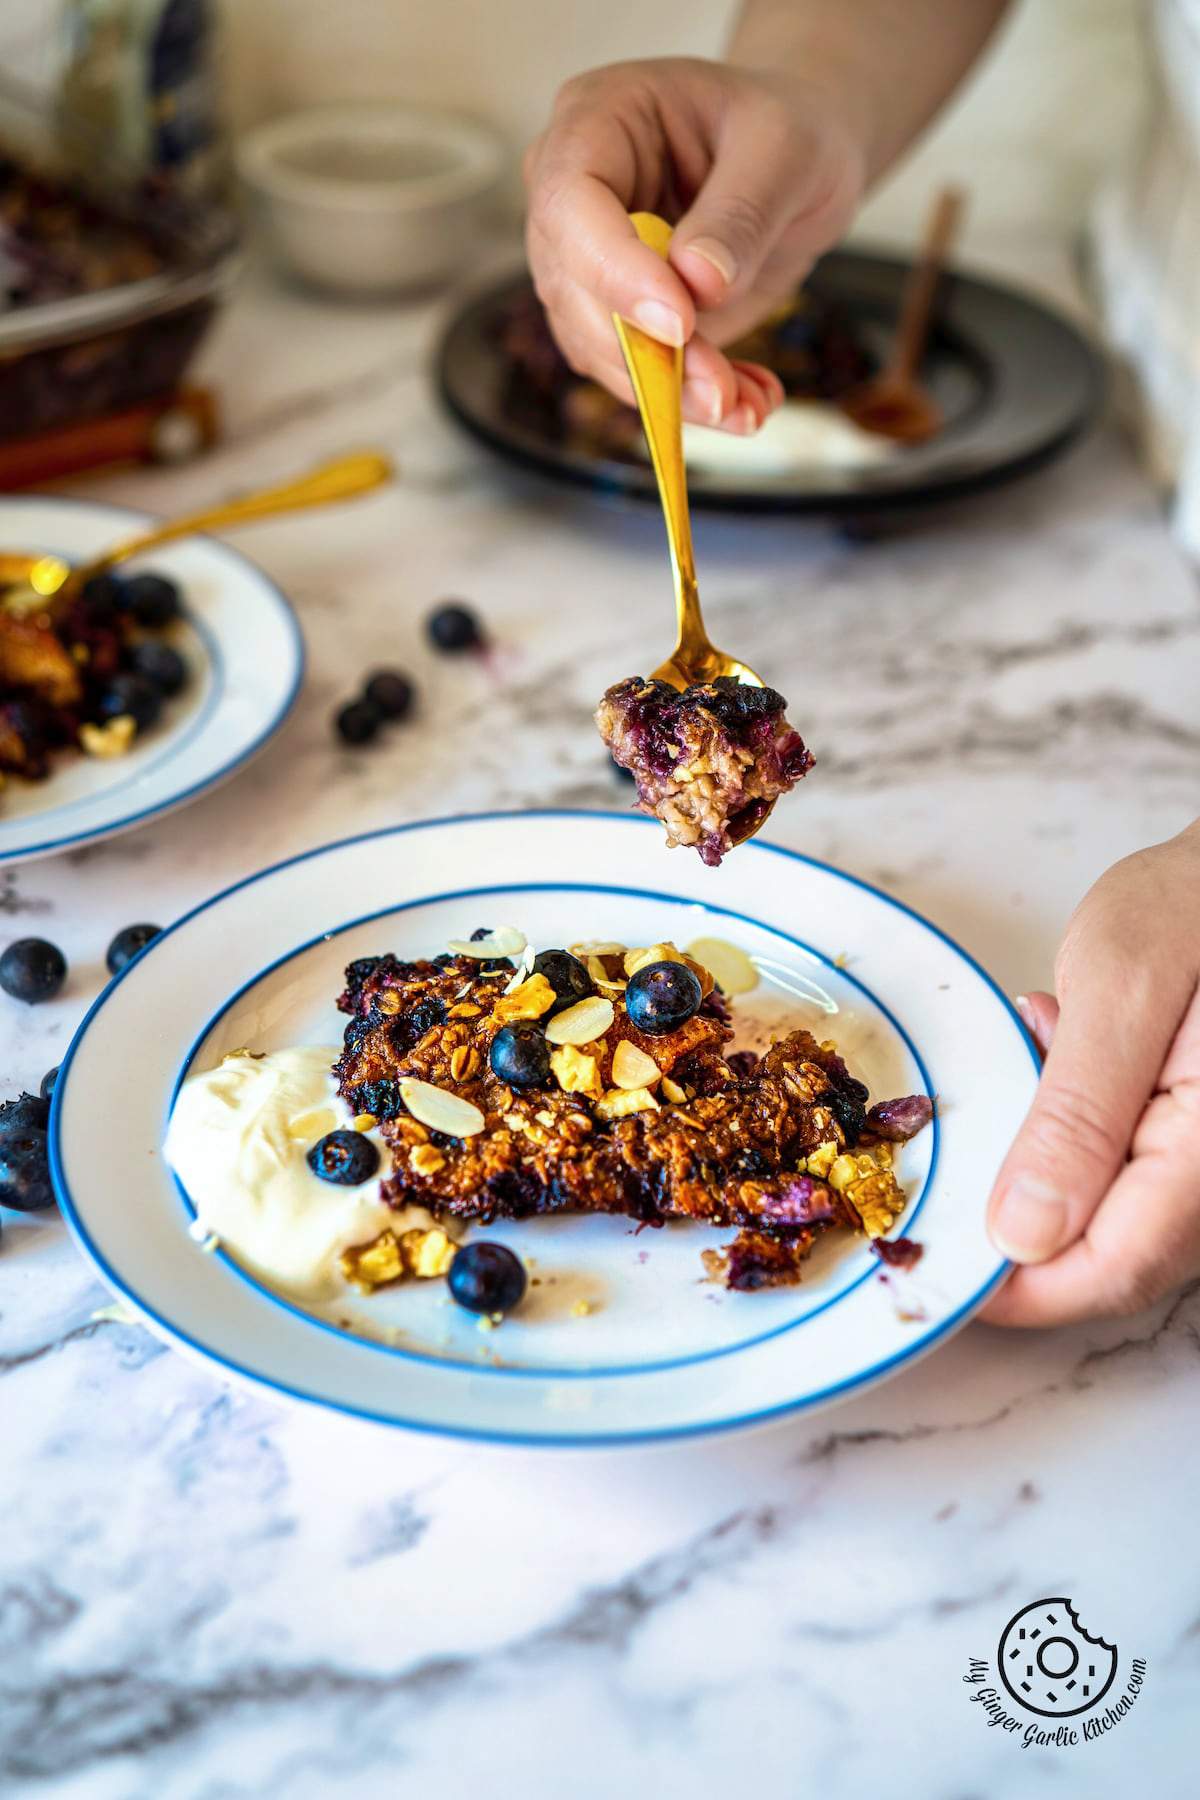 A golden spoon  filled with blueberry baked oats being lifted out of a white plate with a slice of baked oats garnished with blueberries